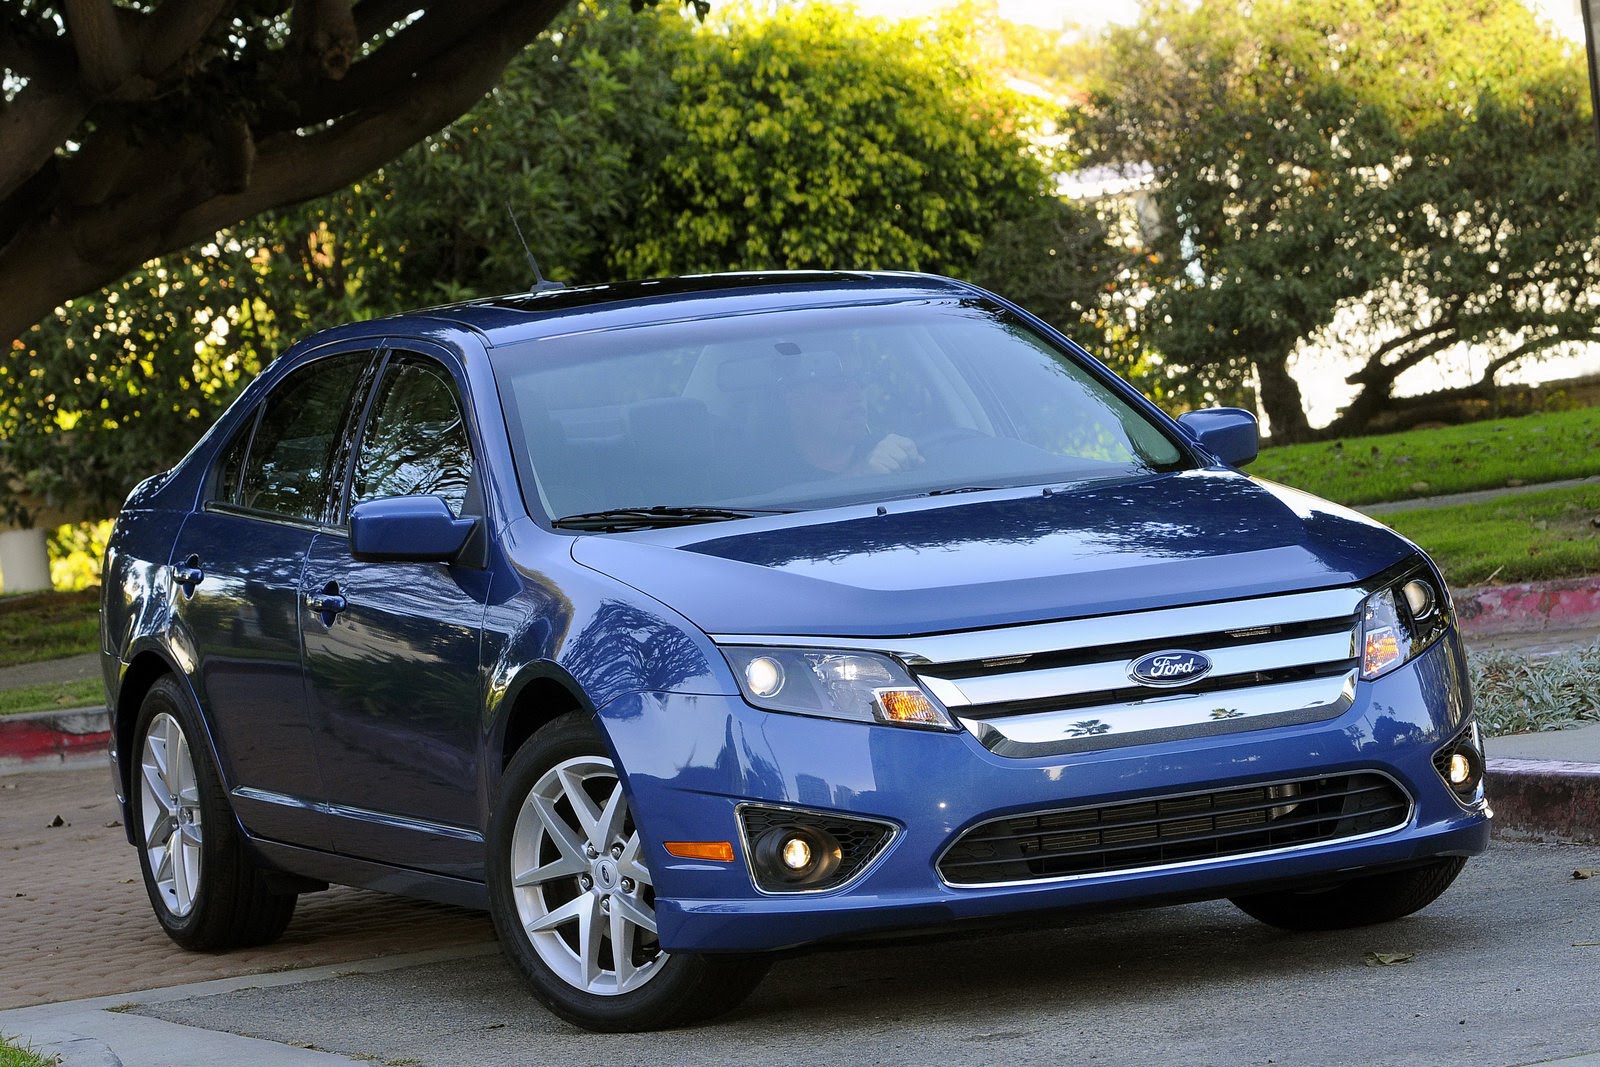 2010 Ford fusion transmission recall #7